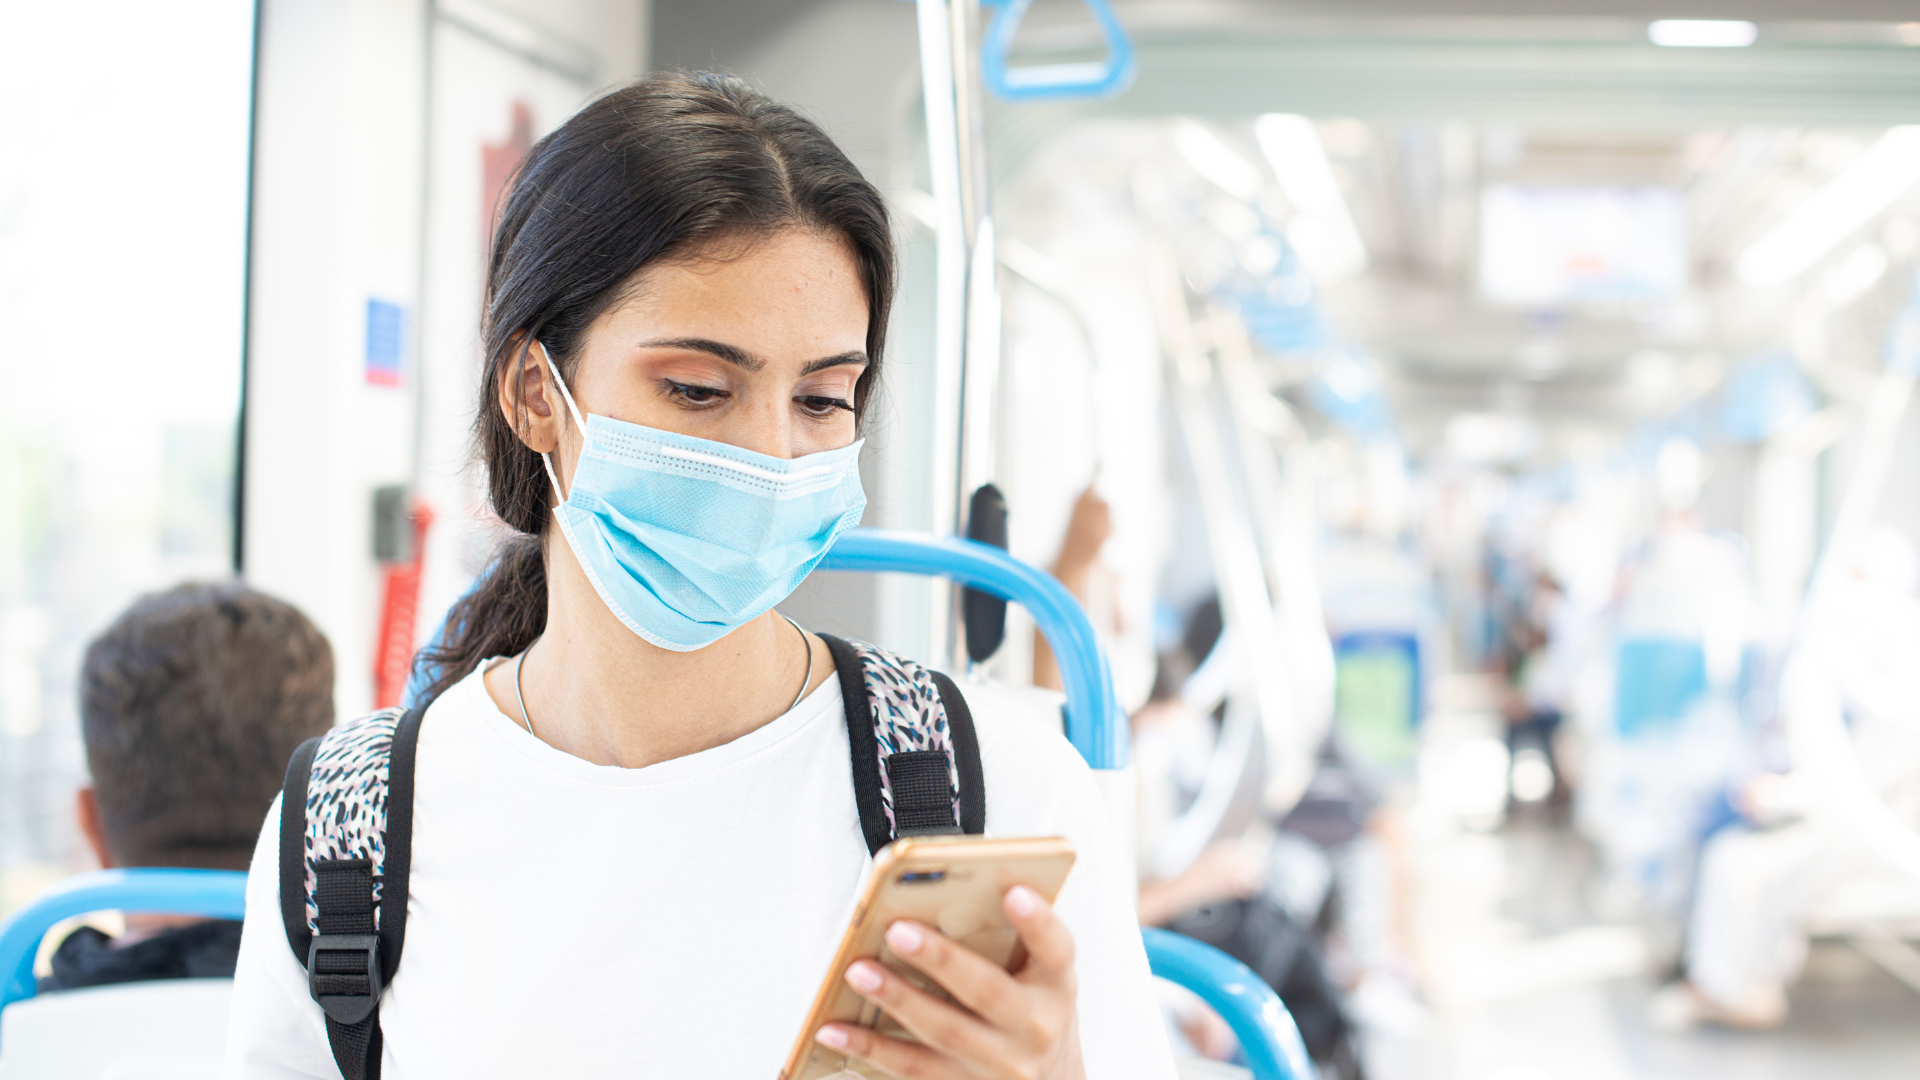 A young woman wearing a face mask and backpack looks at her smartphone while traveling on public transportation, with other passengers visible in the background. Protecting from COVID-19.